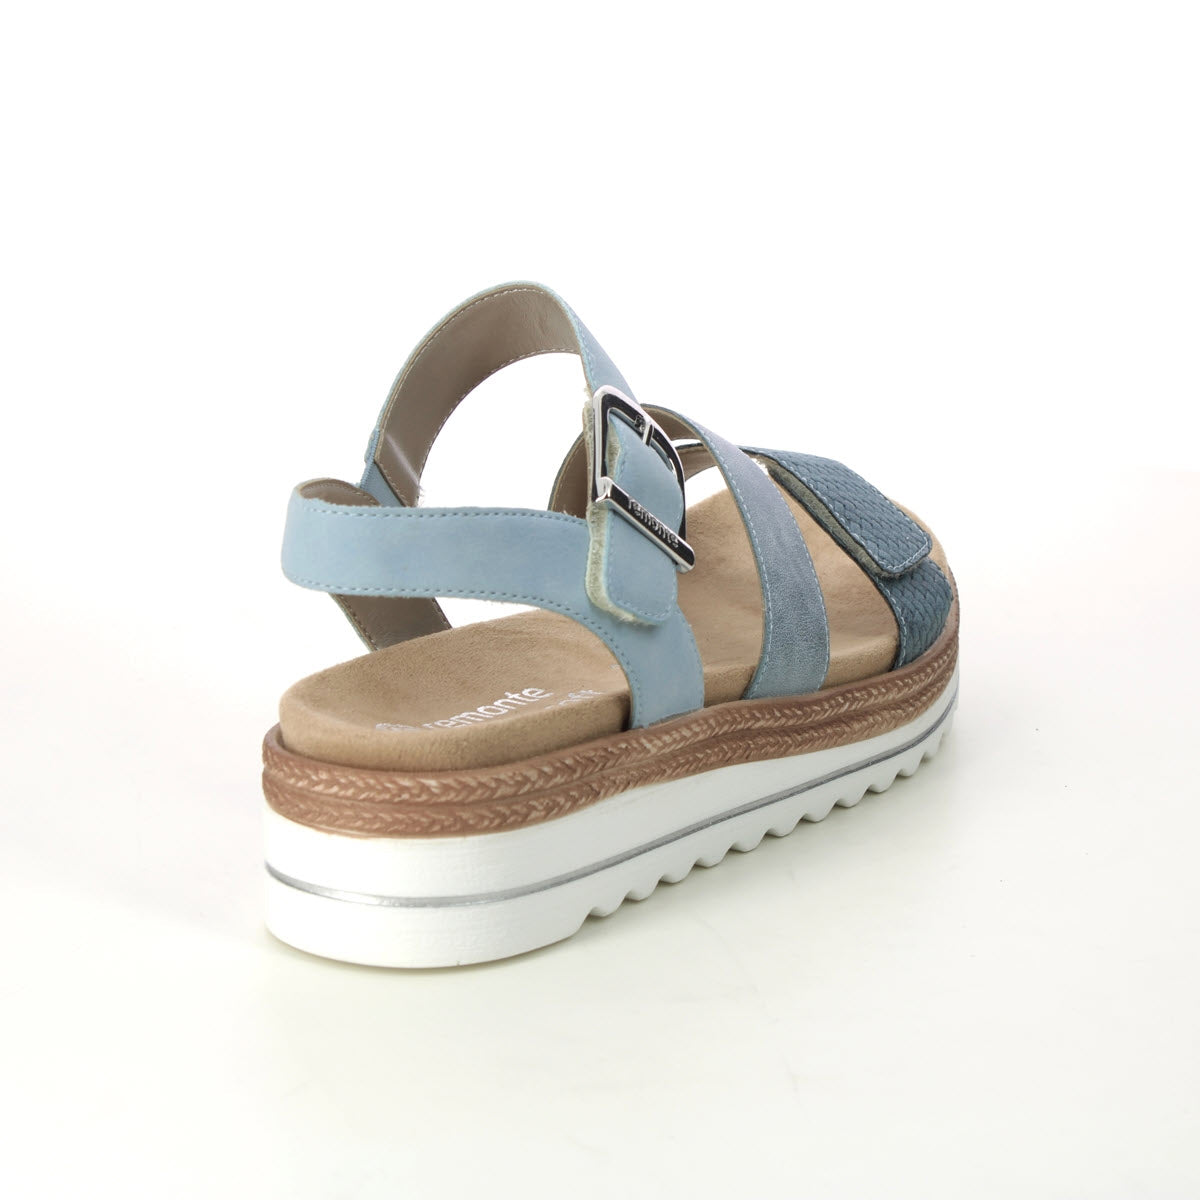 A Remonte women&#39;s sandal featuring blue straps, a buckle, and a chunky white platform sole with shock-absorbing properties, displayed against a plain white background.